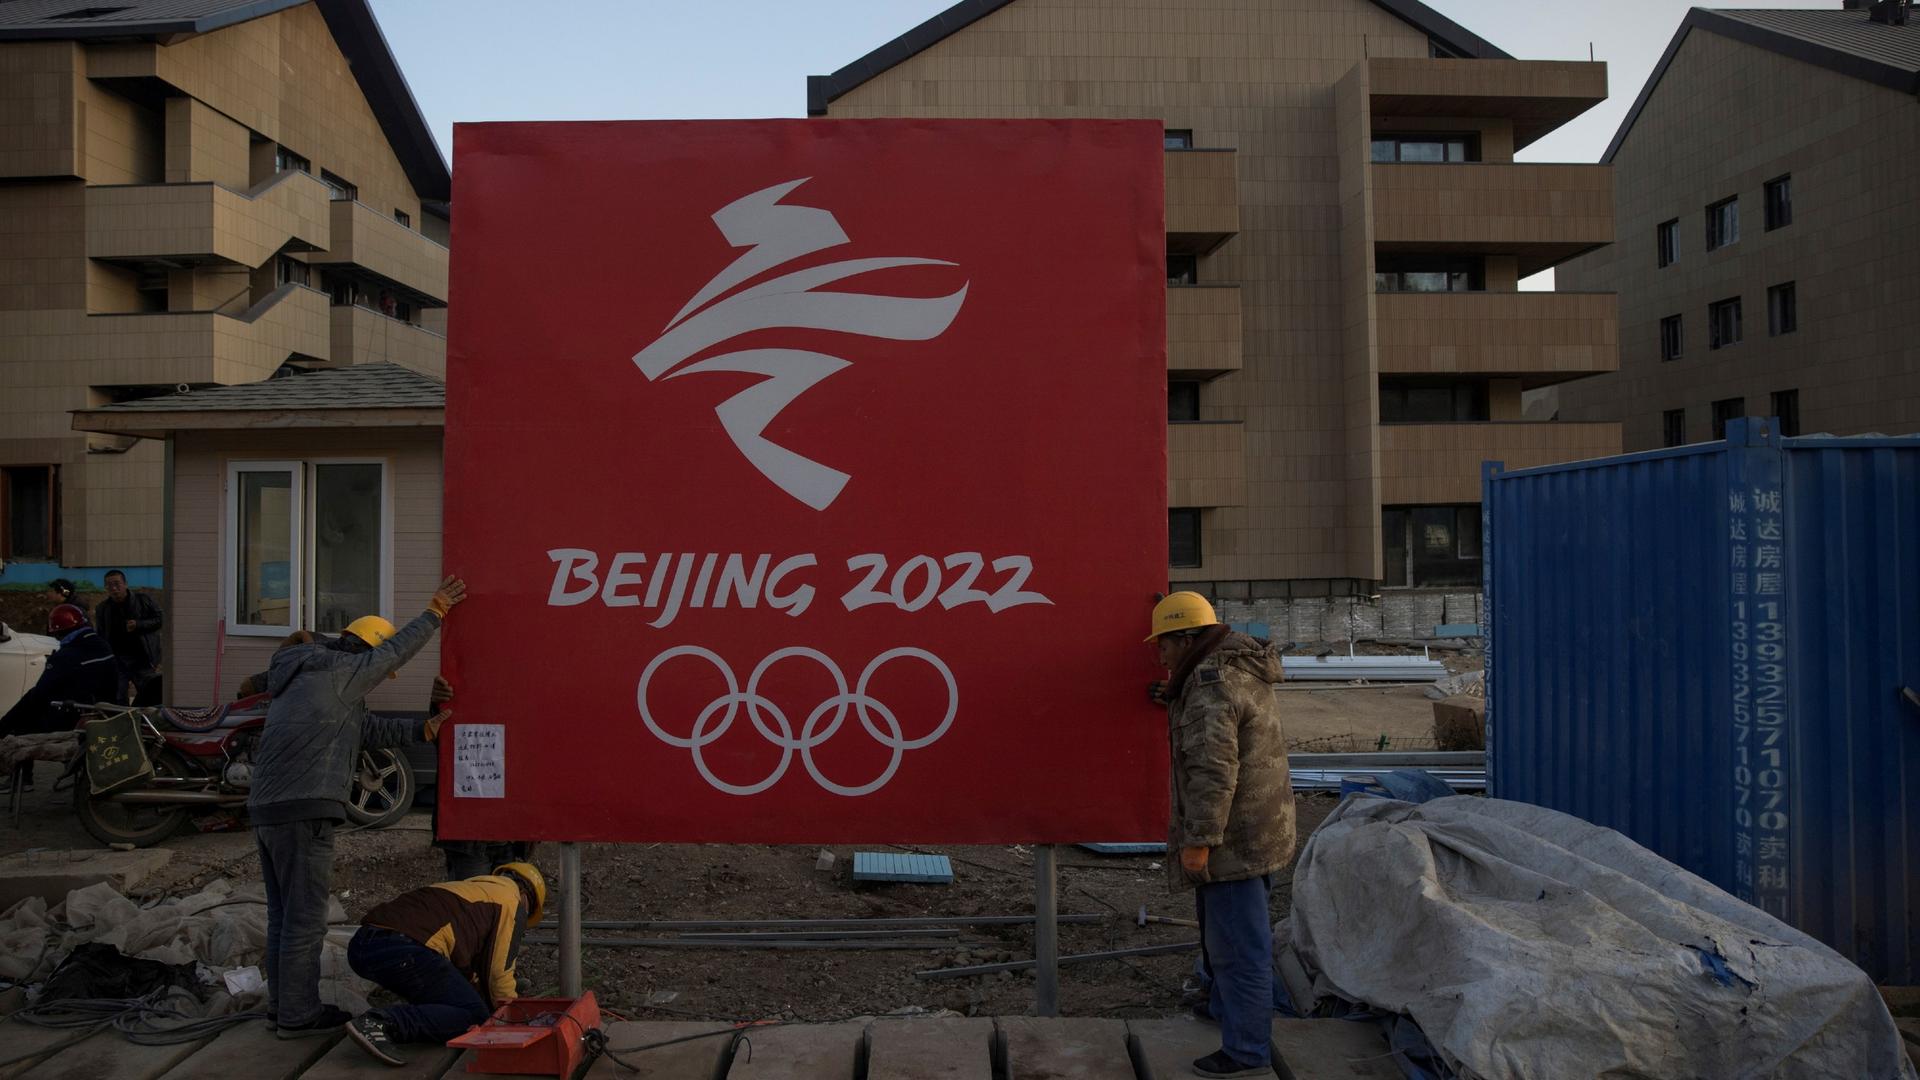 Workers move a sign at the Olympic Village for the 2022 Winter Olympics in the Chongli district of Zhangjiakou, Hebei province, China, Oct. 29, 2020.